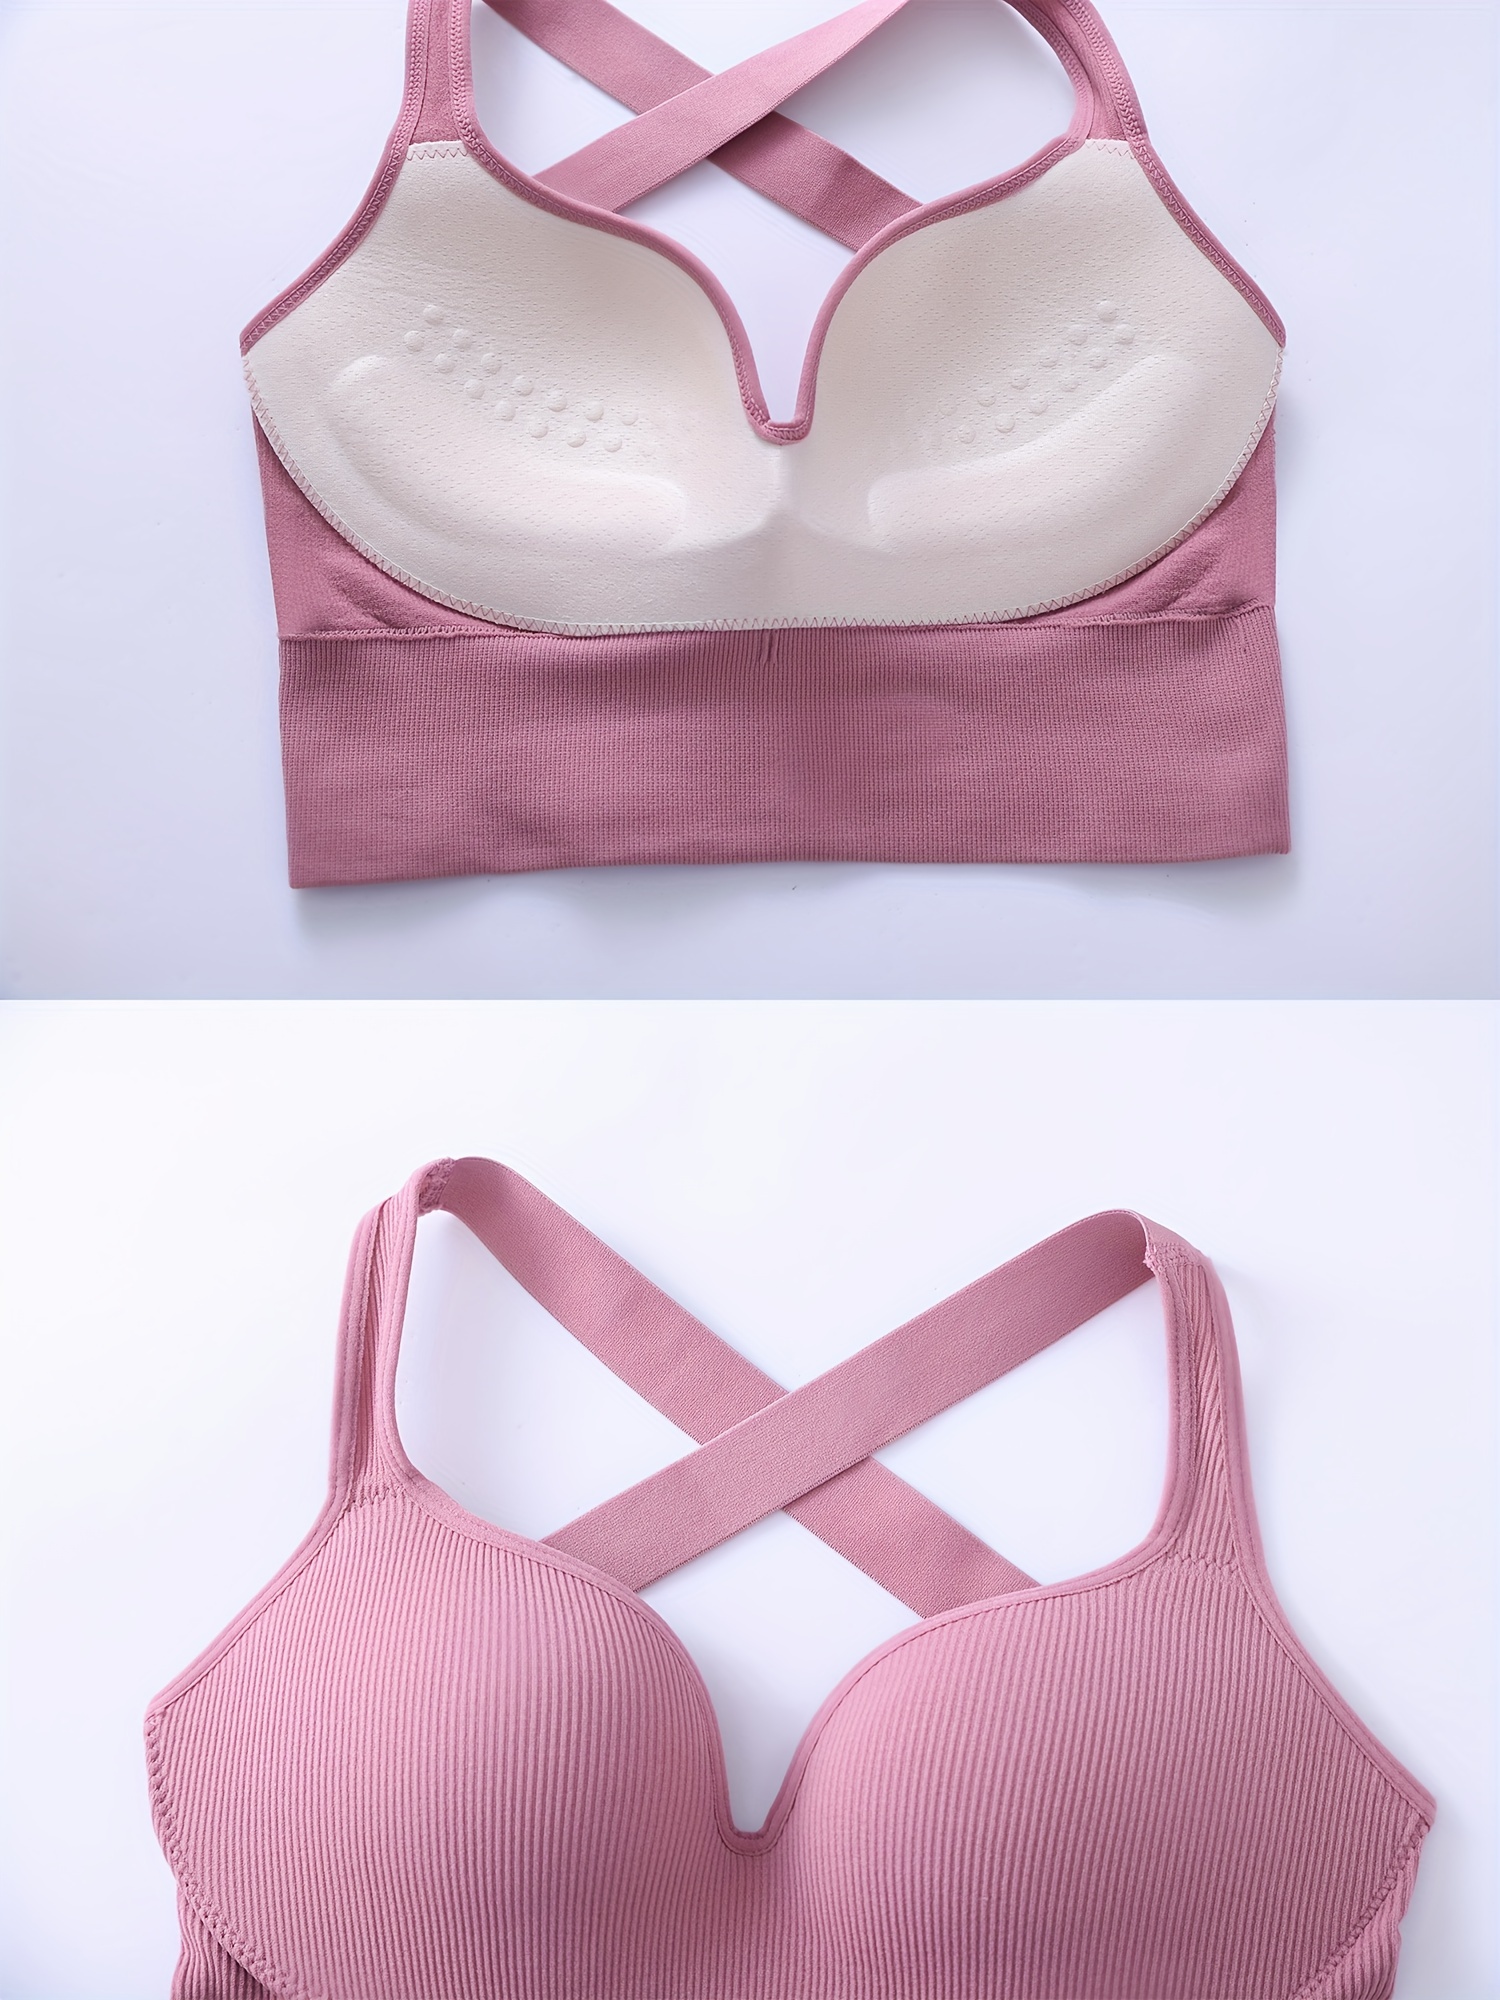 High Impact Seamless Racerback Sports Bra Hrx For Women Pink Hollow Crop  Top With Padded Cups For Running, Yoga, And Fitness X0822 From  Vip_official_001, $10.43